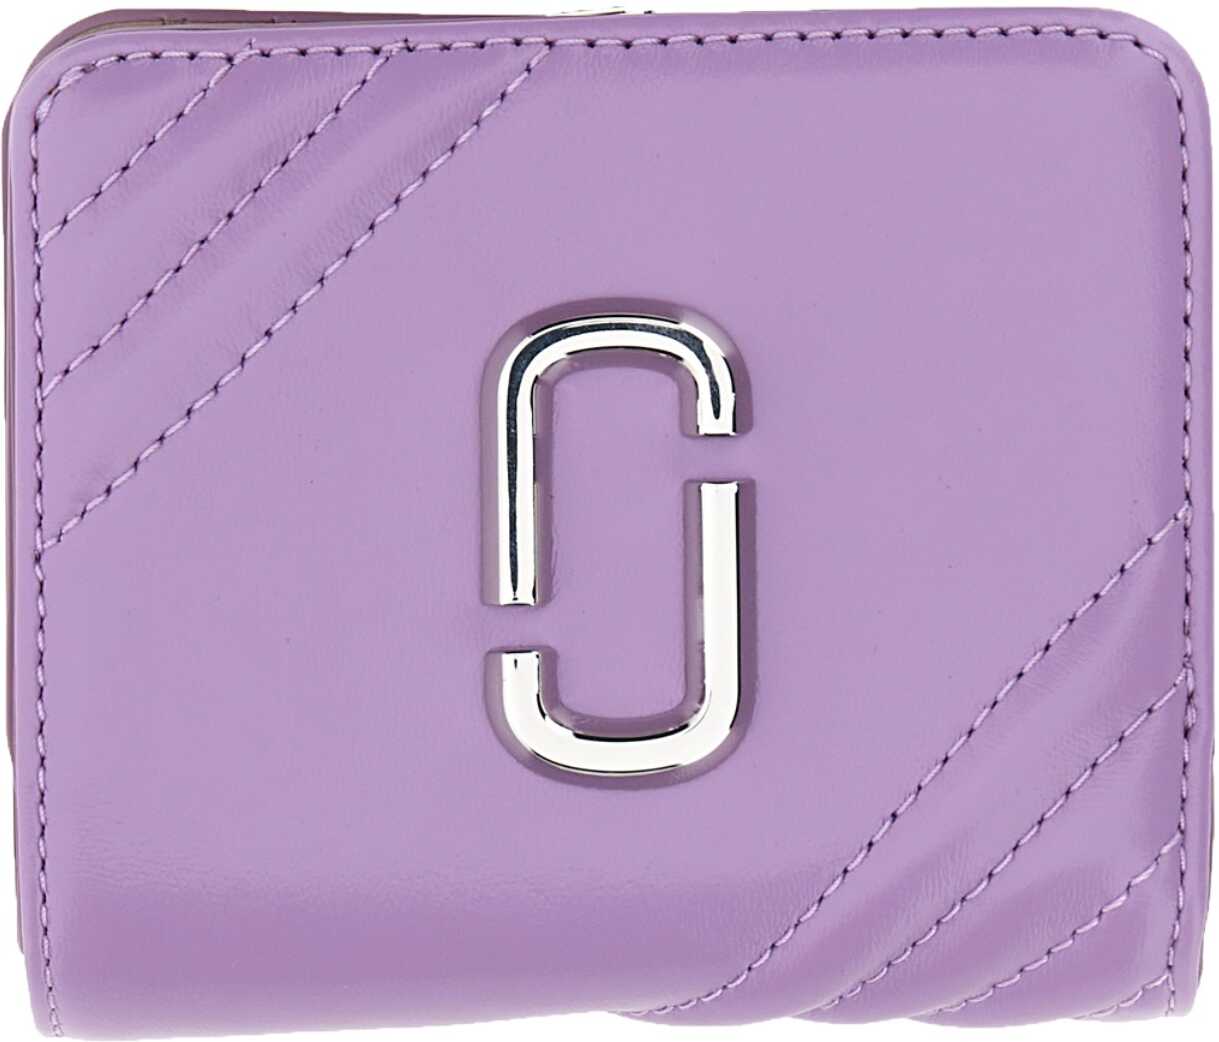 Marc Jacobs The Glam Shot Mini Compact Wallet LILAC